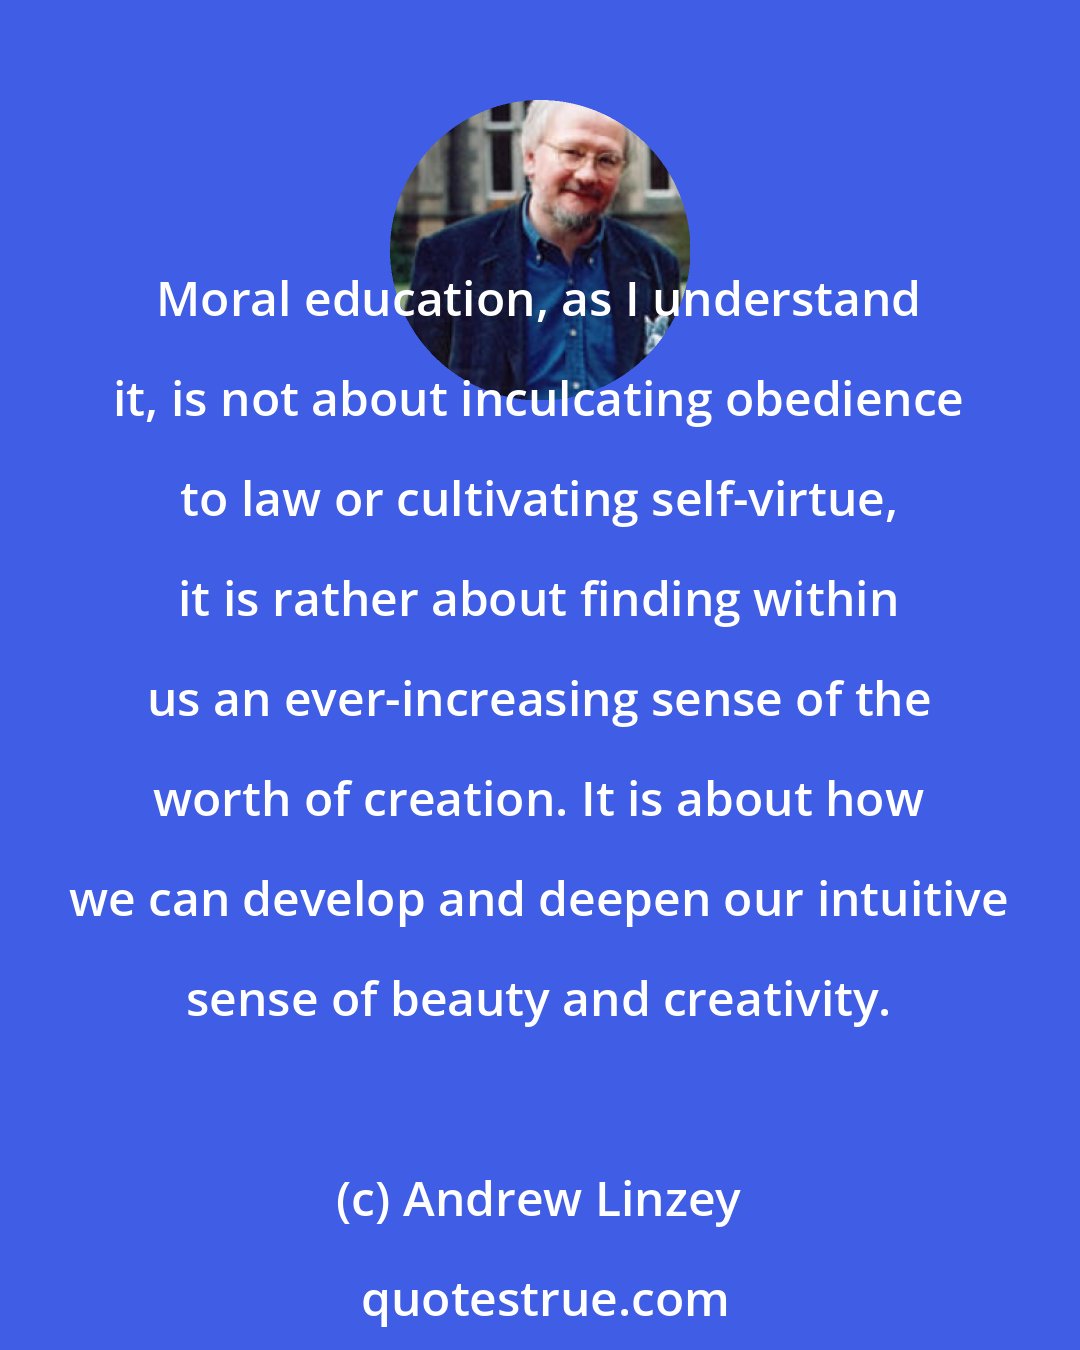 Andrew Linzey: Moral education, as I understand it, is not about inculcating obedience to law or cultivating self-virtue, it is rather about finding within us an ever-increasing sense of the worth of creation. It is about how we can develop and deepen our intuitive sense of beauty and creativity.